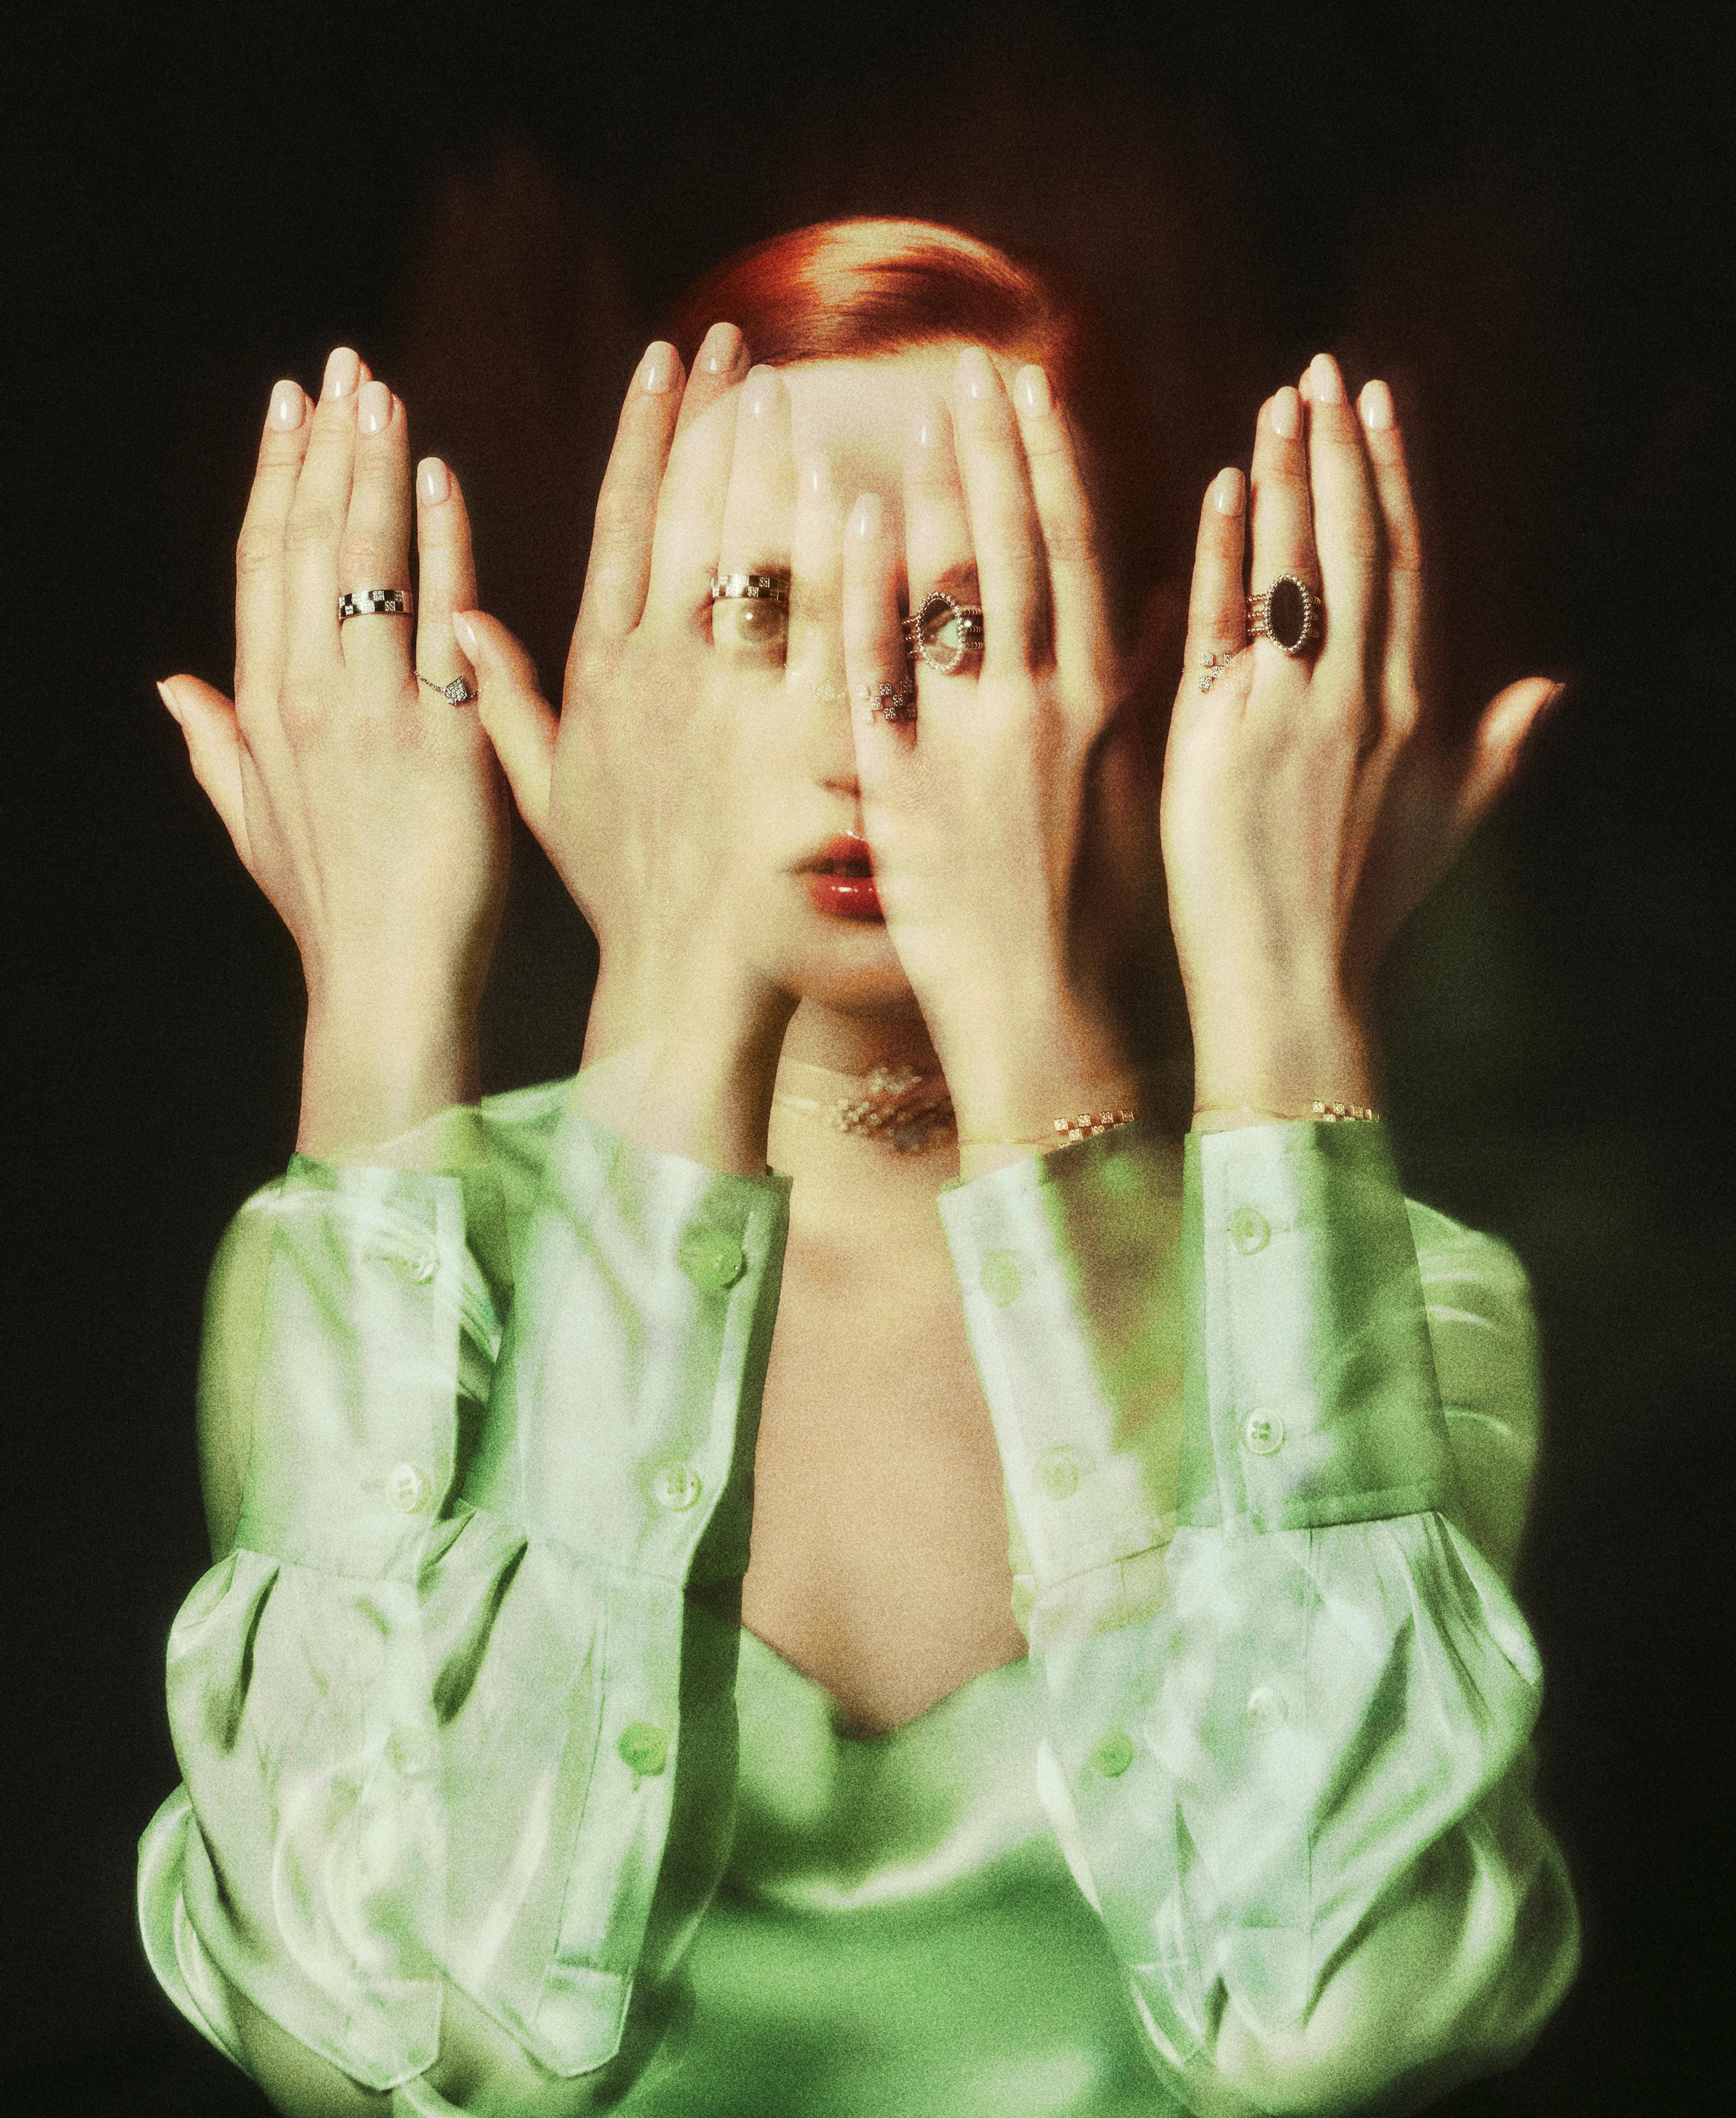 Woman in a green blouse with her hands in front of her face.